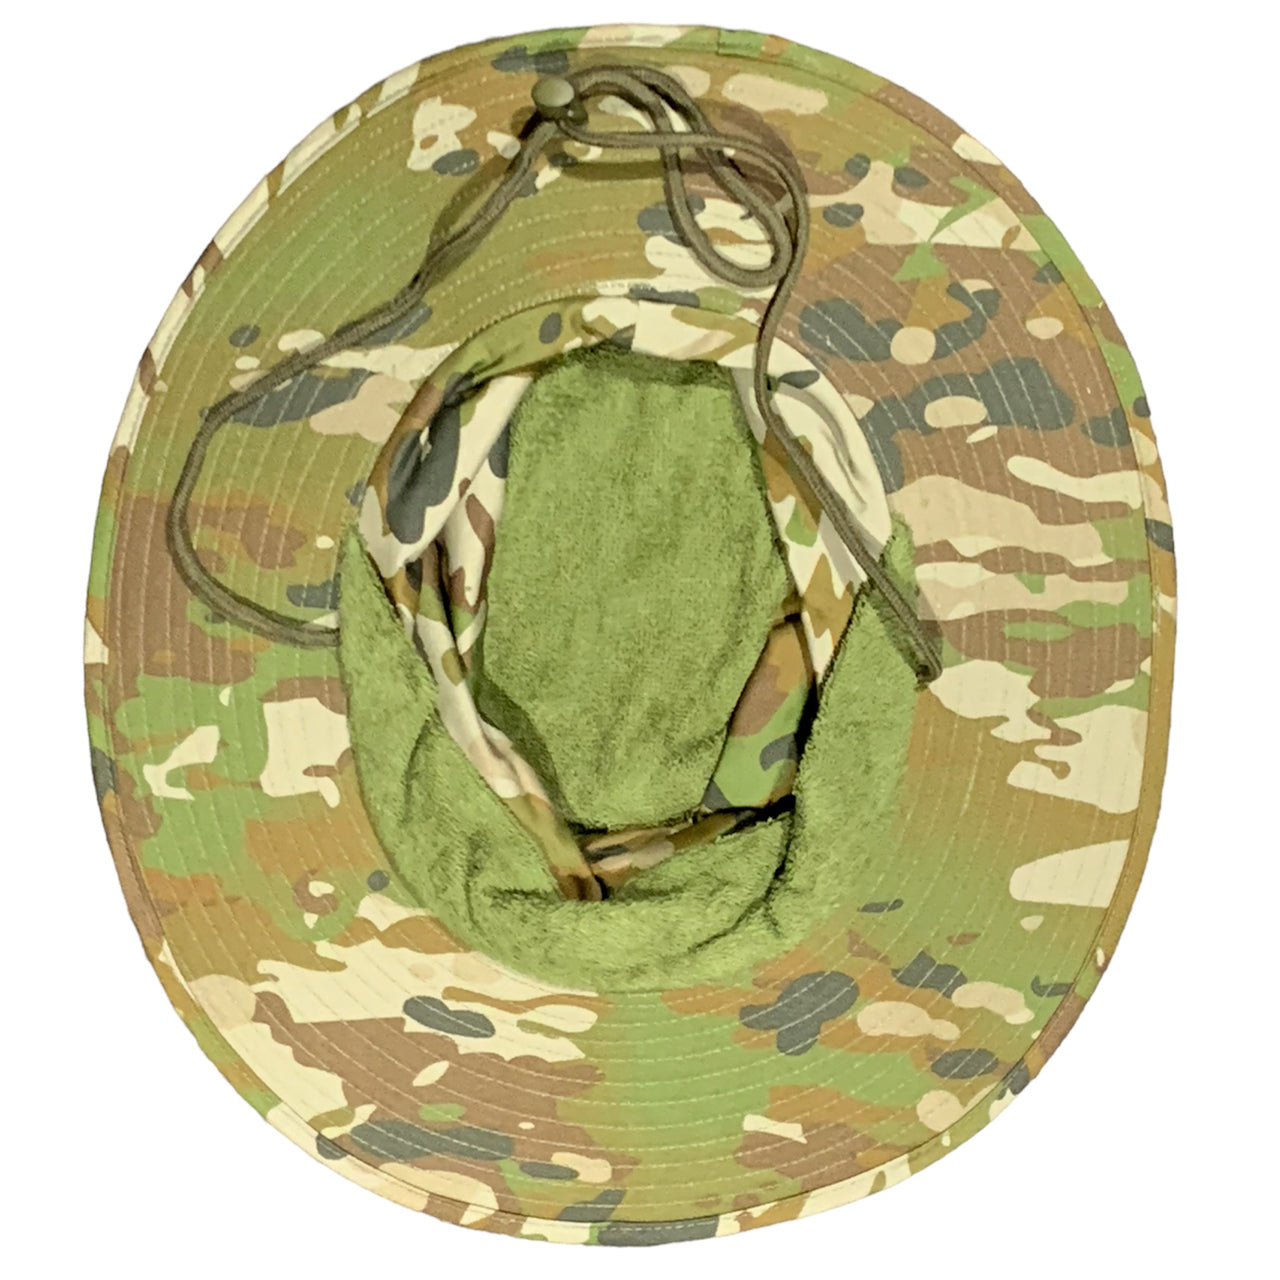 Experience the ultimate in style and functionality with the Army Australian Multicam Wide Brimmed Boonie Hat AMCU. Featuring a classic slouch hat design with a trendy 83 mm wide brim, this hat also includes a convenient cord chinstrap and cord lock www.defenceqstore.com.au inside view of towel